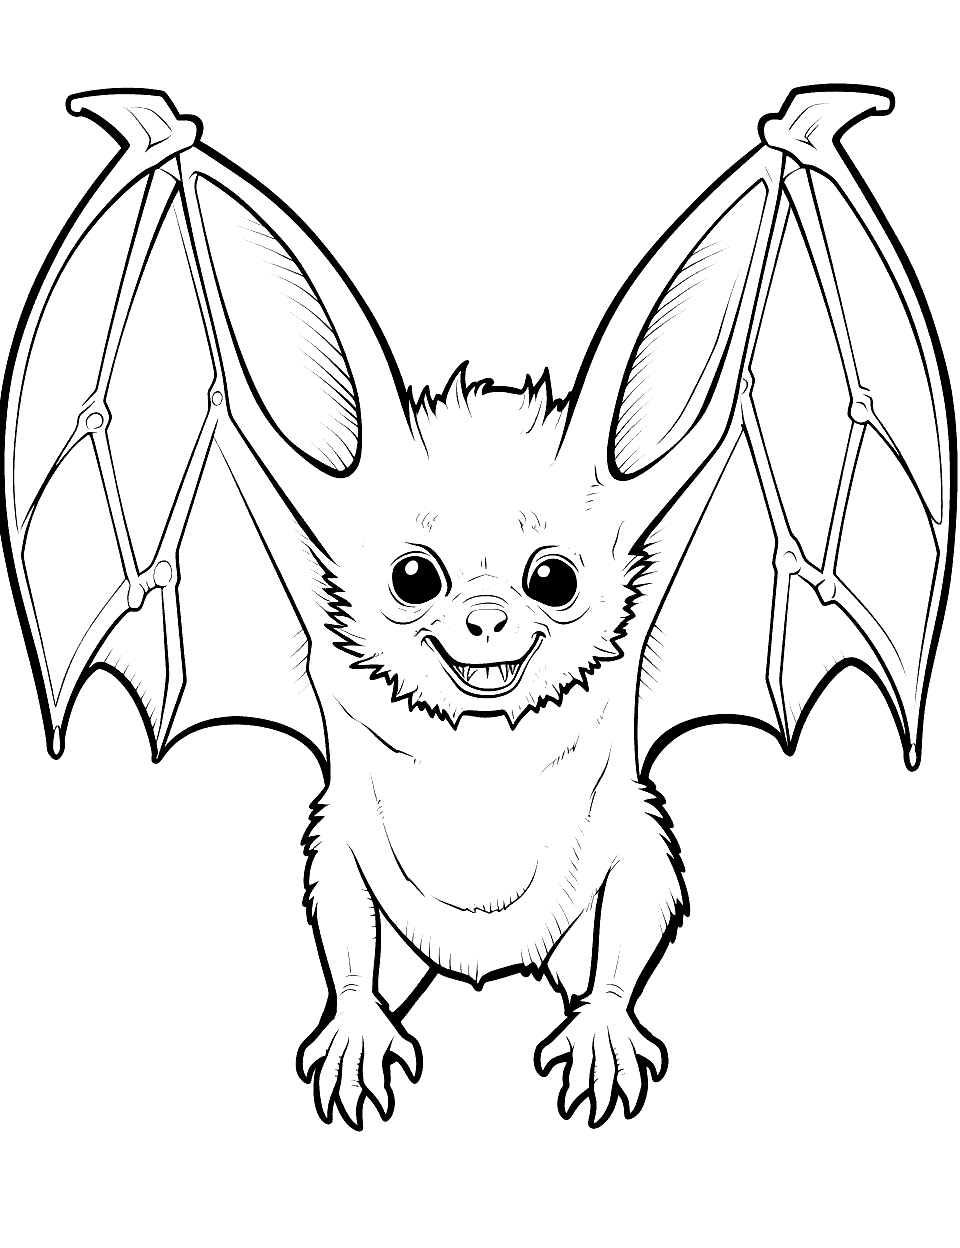 Microbat Close-Up Bat Coloring Page - A detailed close-up of a microbat’s features.